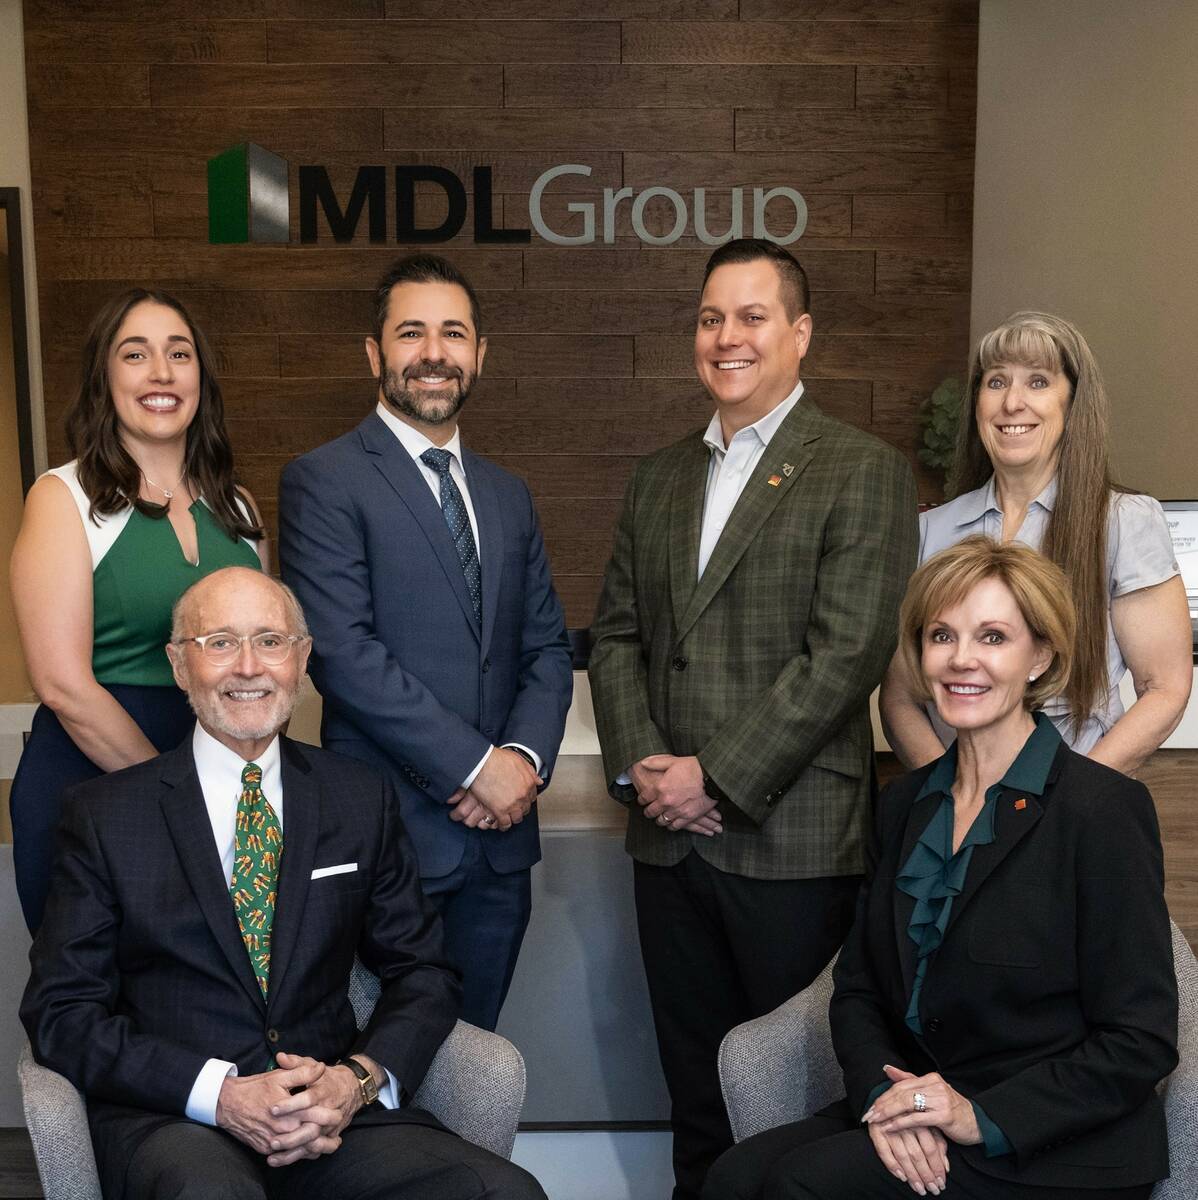 MDL Group, a Las Vegas-based commercial real estate firm, has announced new leadership.